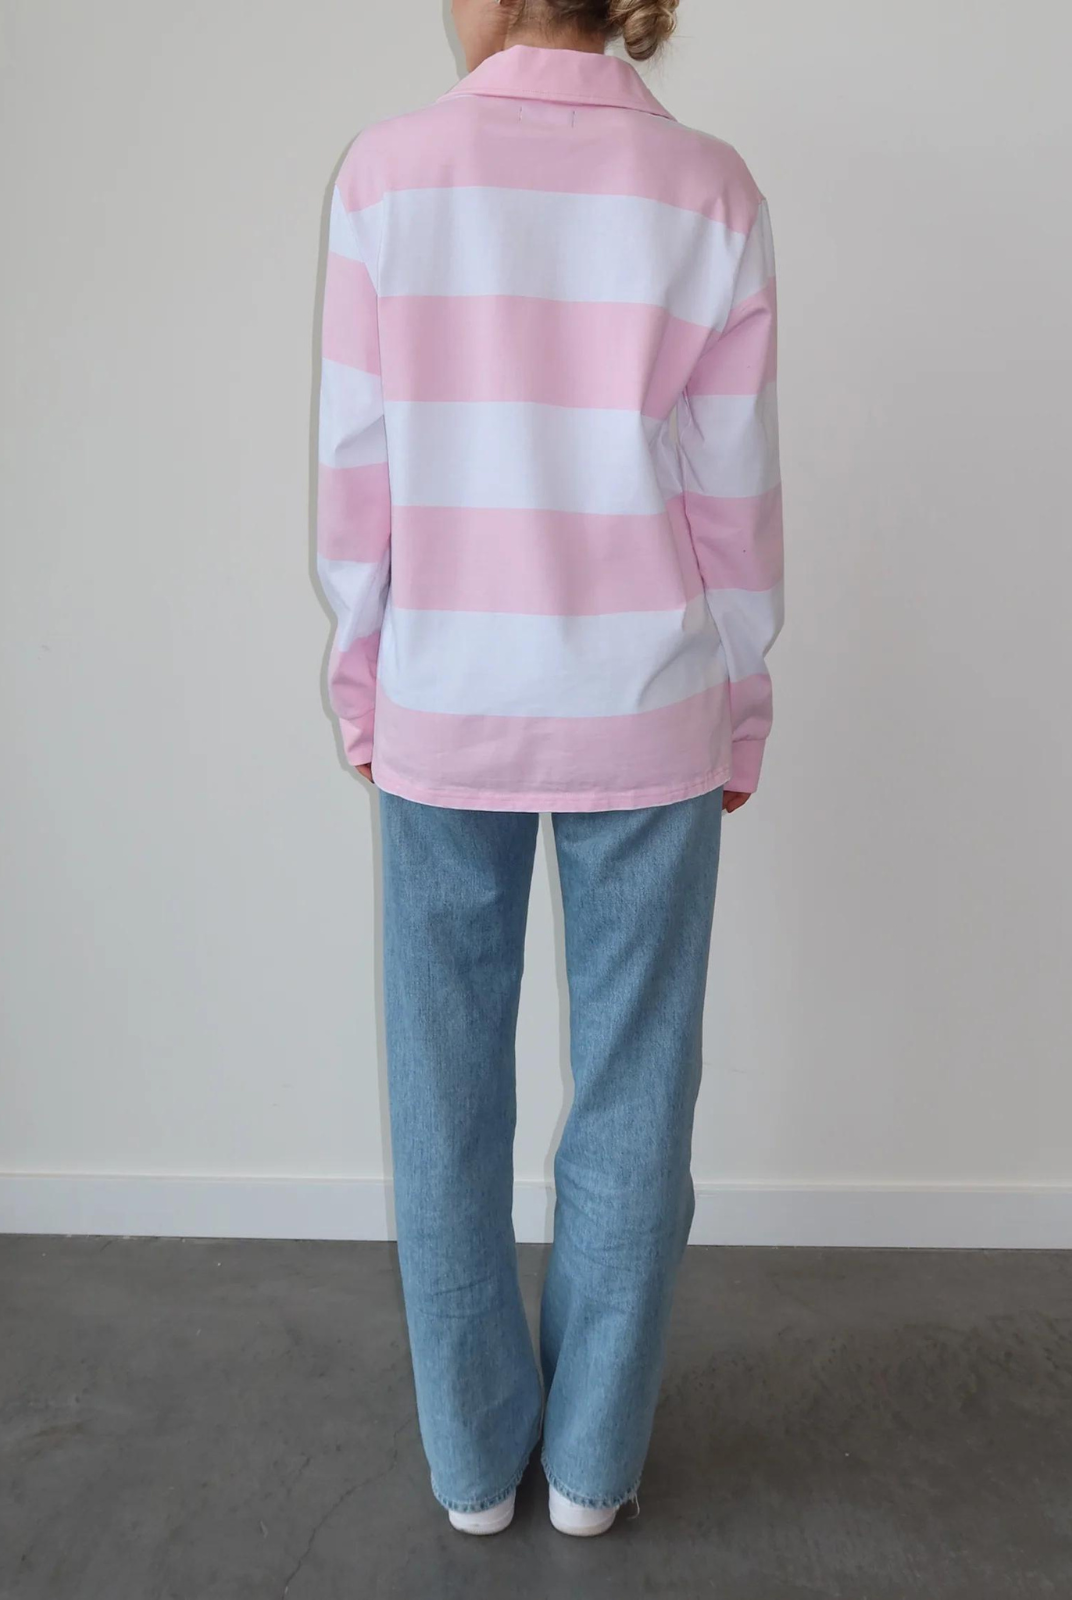 Brunette The Label The "HEART" Striped Rugby Shirt. Feel the love wherever you go in the "Heart" Striped Rugby Shirt in Baby Pink and White. It features bold stripes and a ribbed collar and sleeves. We recommend sizing up for a more oversized fit. 